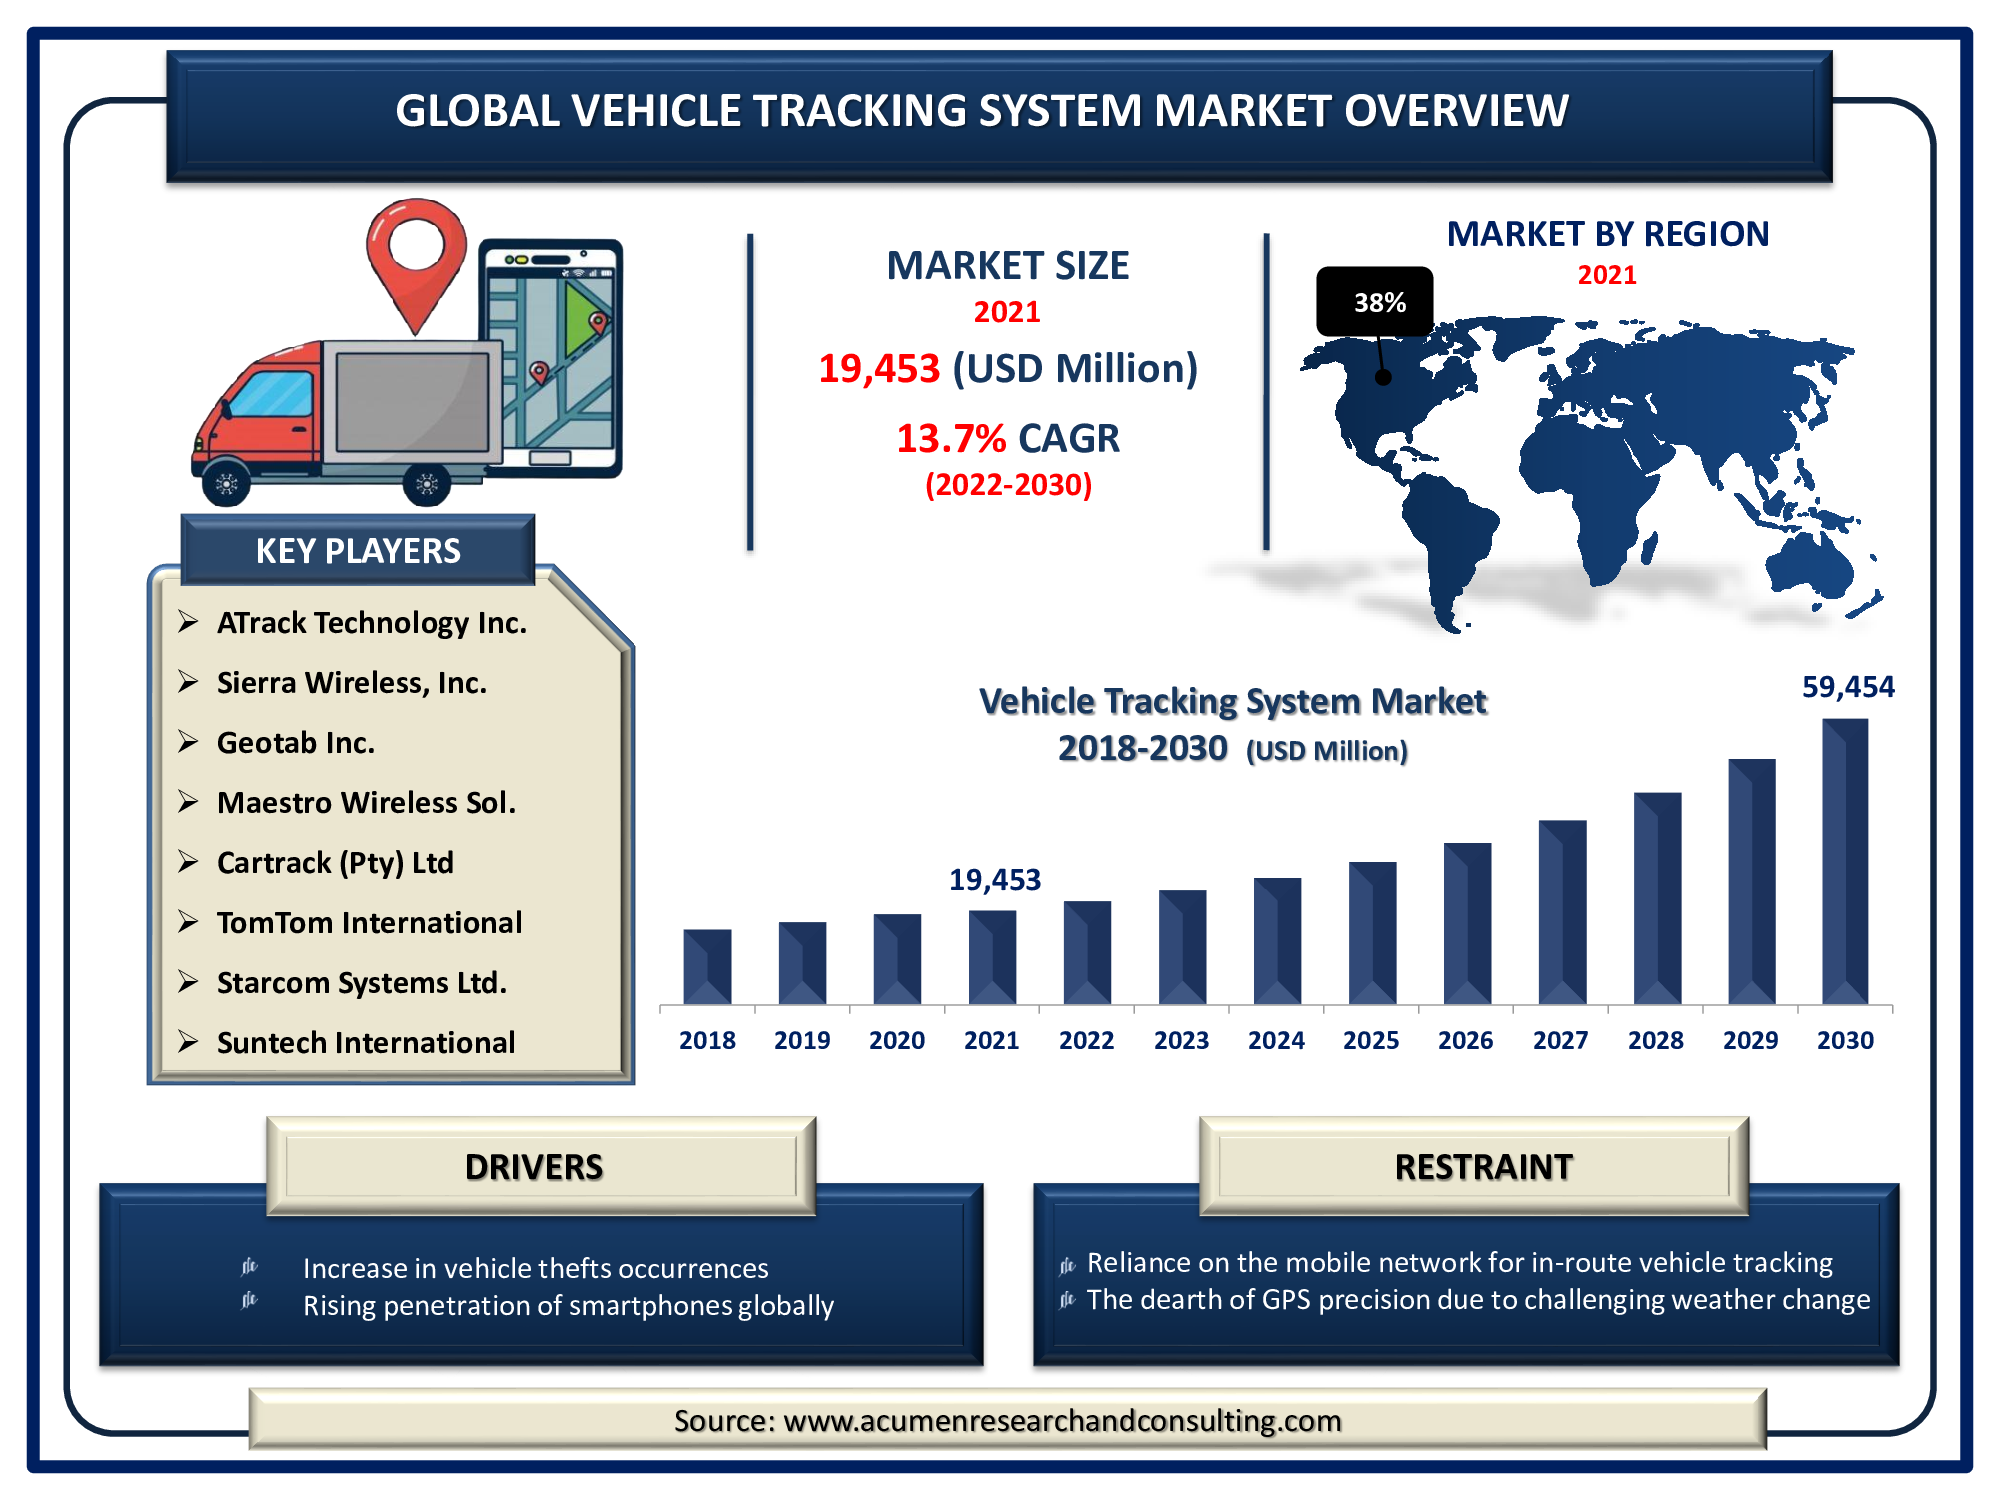 Vehicle Tracking System Market size accounted for USD 19,453 Million in 2021 and is expected to reach the value of USD 59,454 Million by 2030 growing at a CAGR of 13.7% during the forecast period from 2022 to 2030.